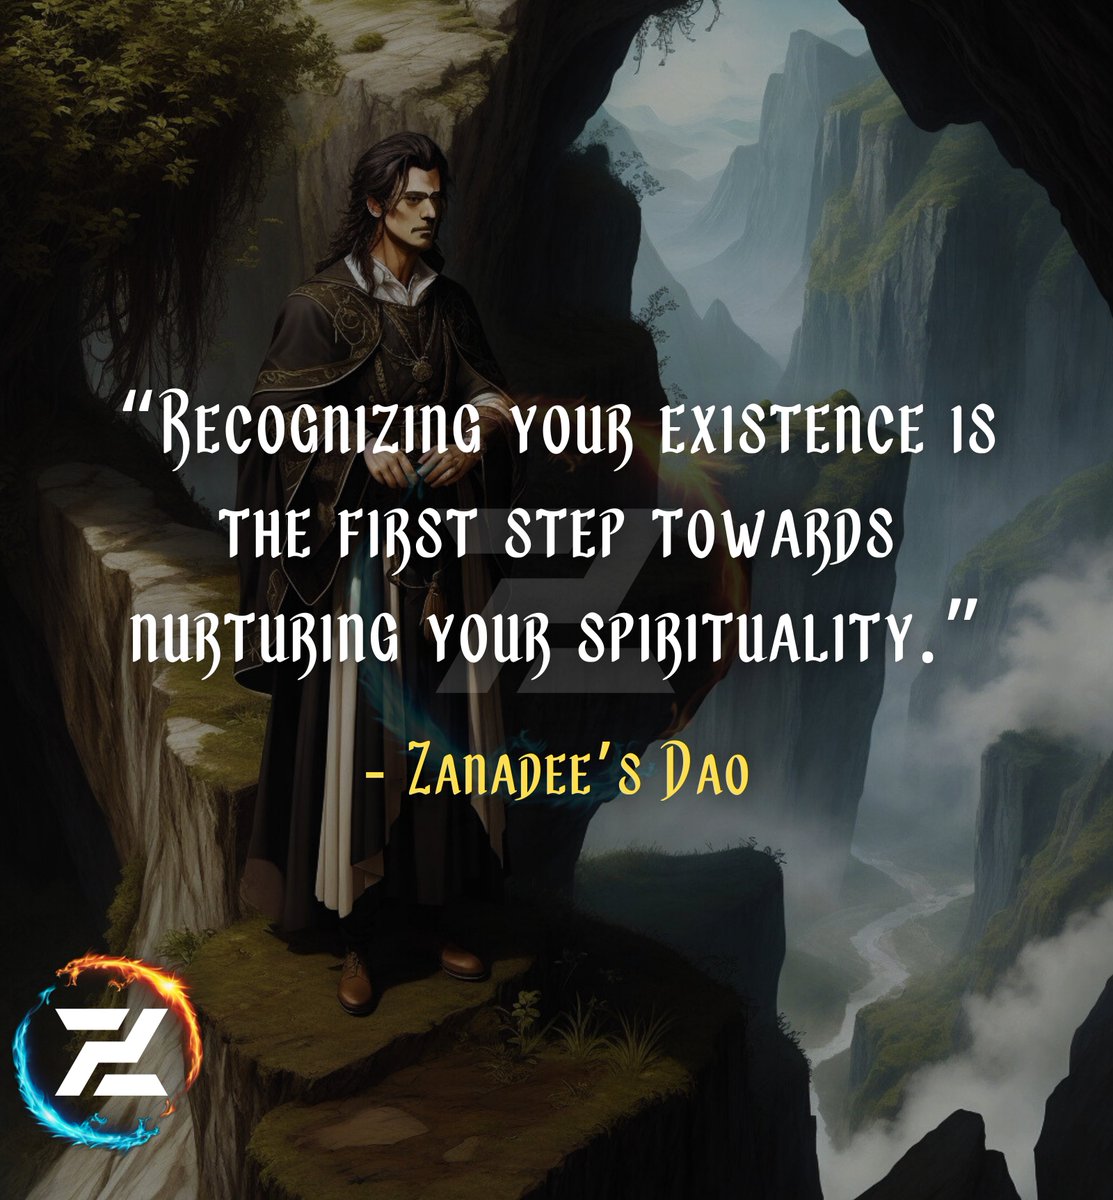 Existential Awakening

“Recognizing your existence is the first step towards nurturing your spirituality.”

#RecognizeExistence #NurtureSpirituality #SelfAwareness #DeeperConnections #SpiritualJourney

Zanadee’s Dao